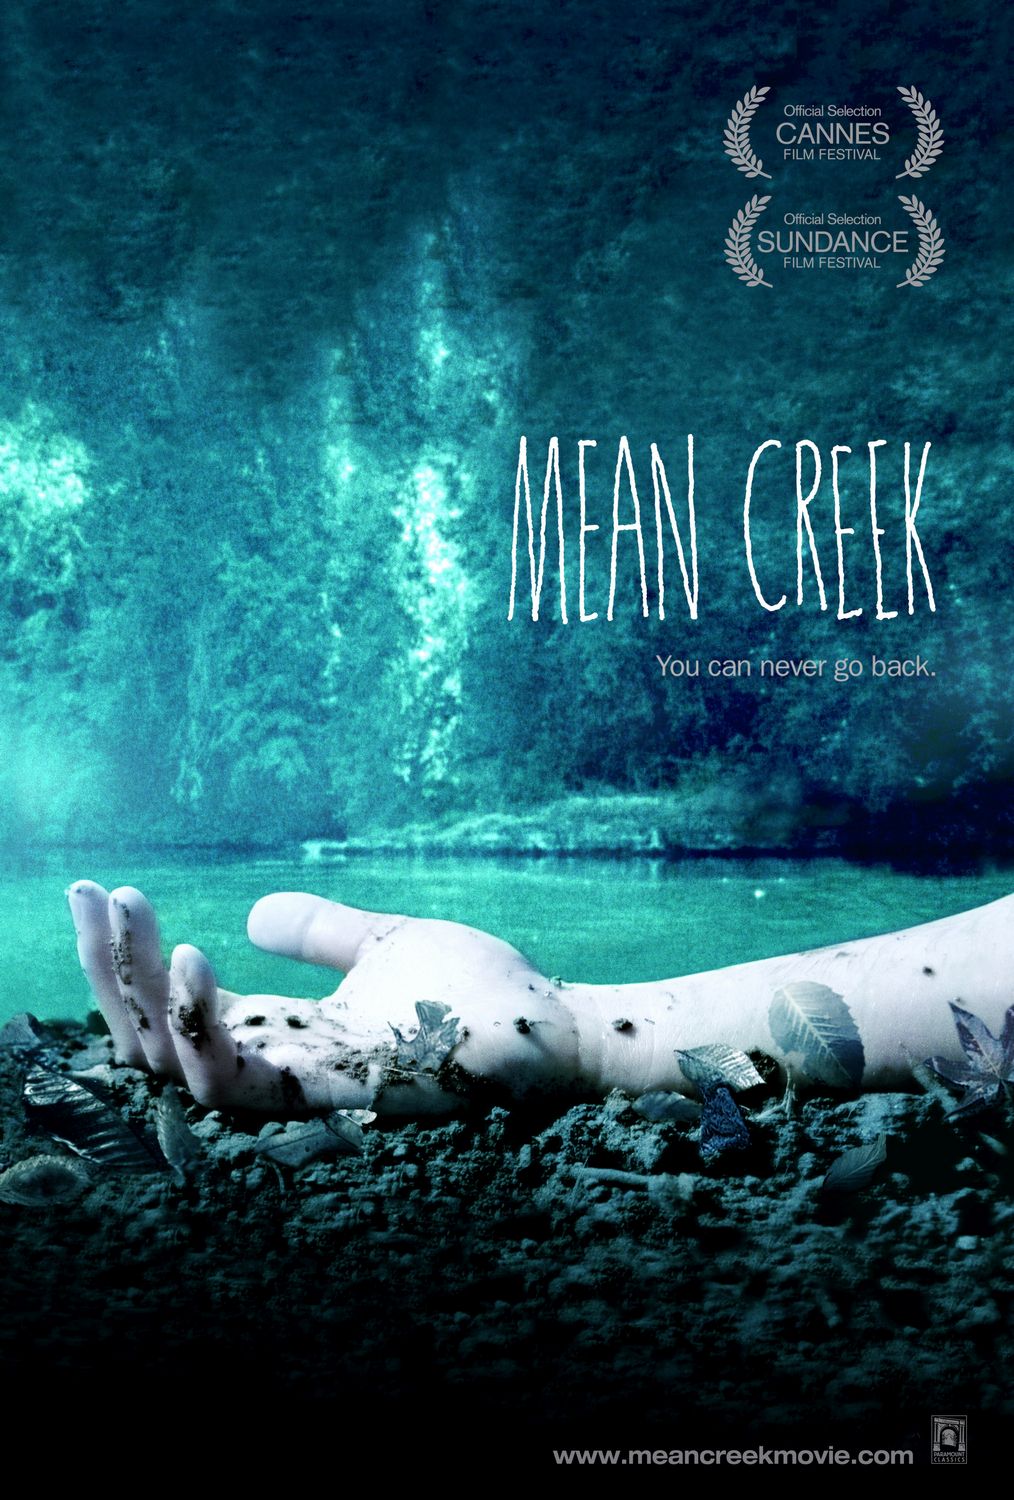 Extra Large Movie Poster Image for Mean Creek (#3 of 3)